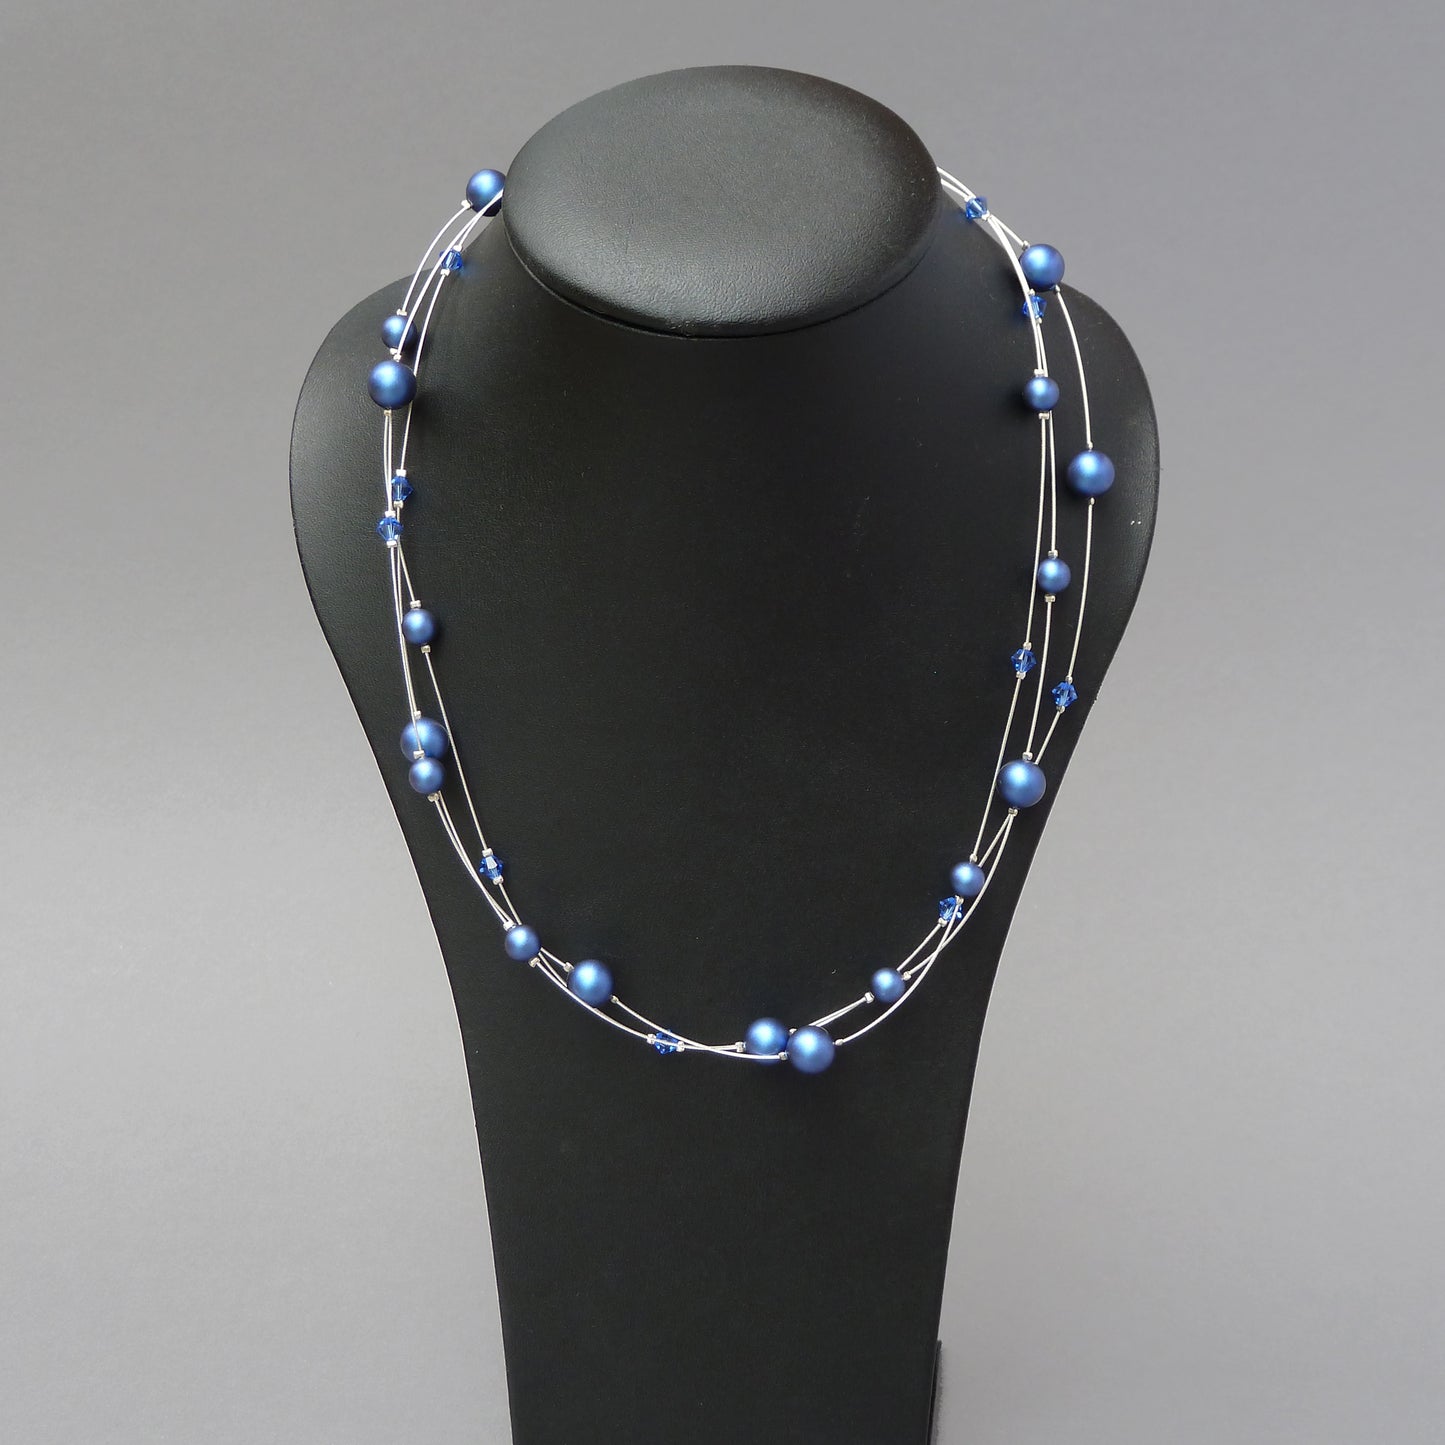 Dark blue floating pearl necklace